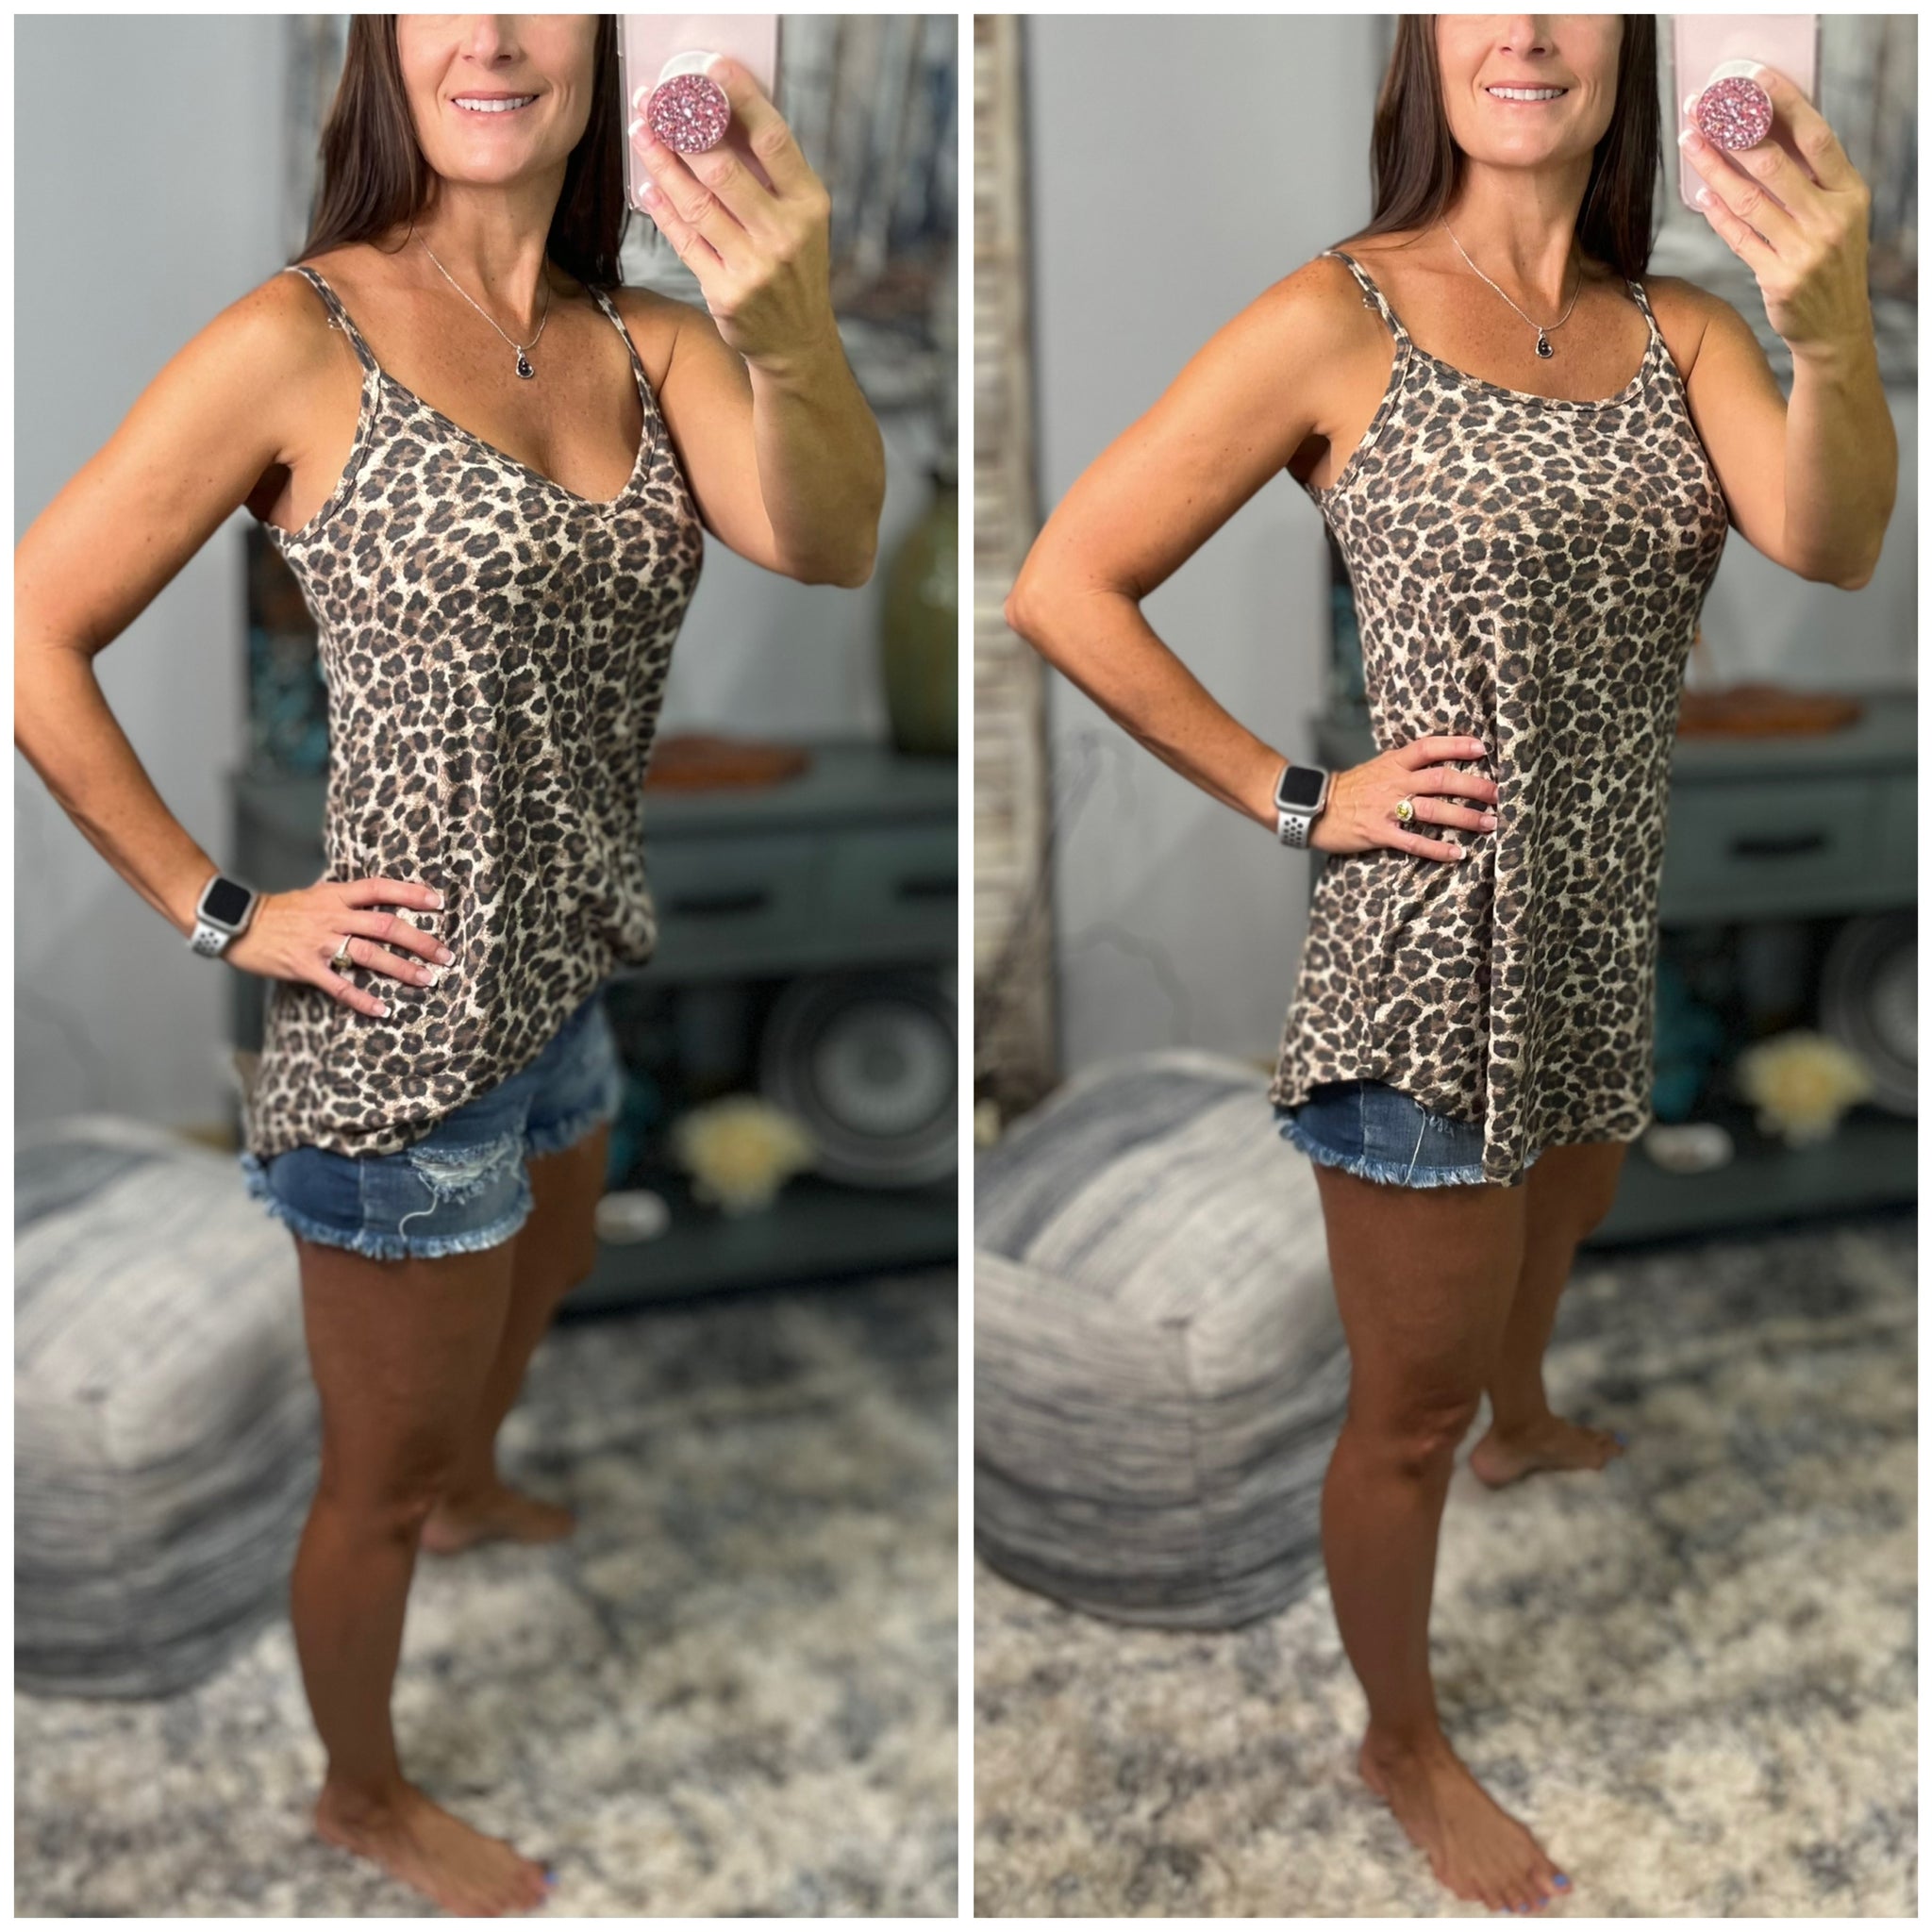 “Heat Wave” Reversible Leopard Low Scoop Or V Neck Spaghetti Strap Tank Shirt Top Distressed Brown